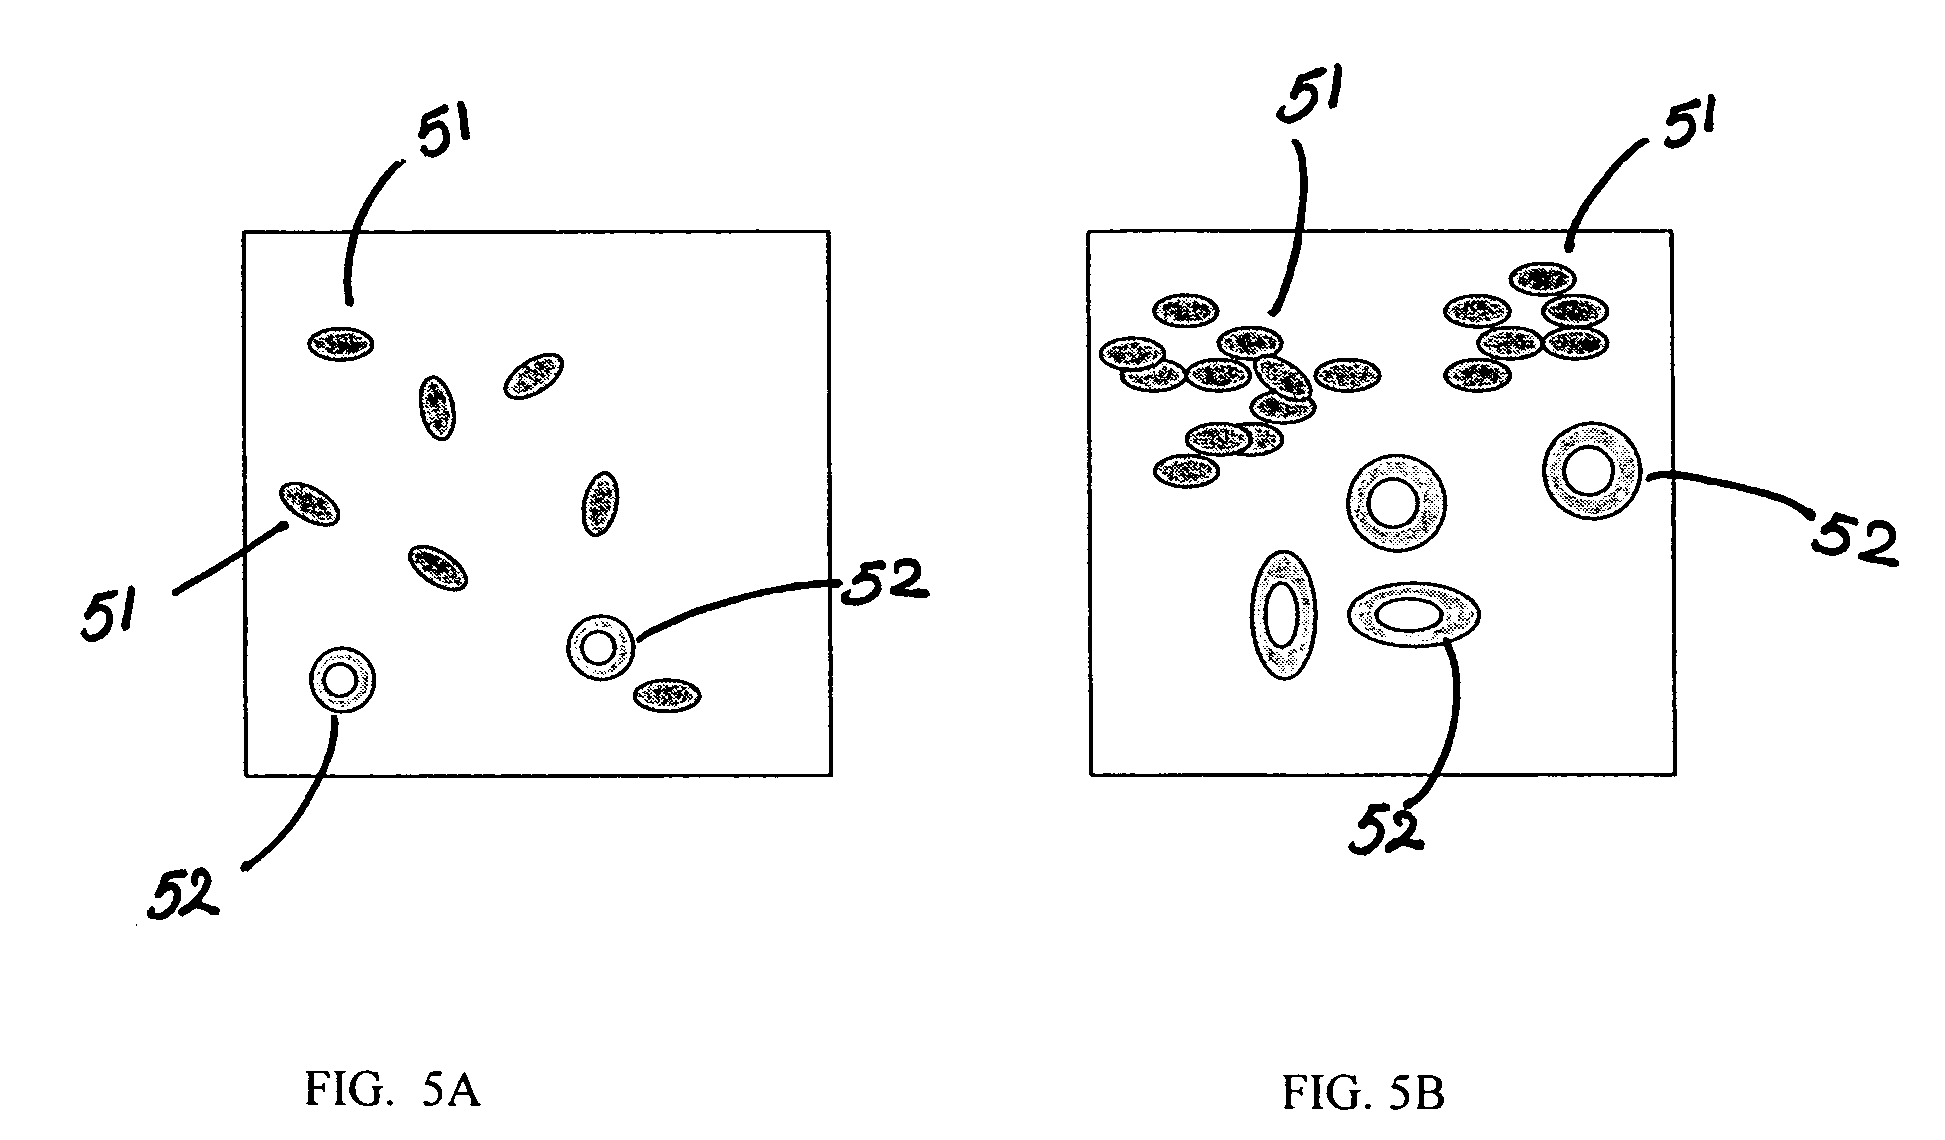 Systems and methods of identifying biomarkers for subsequent screening and monitoring of diseases